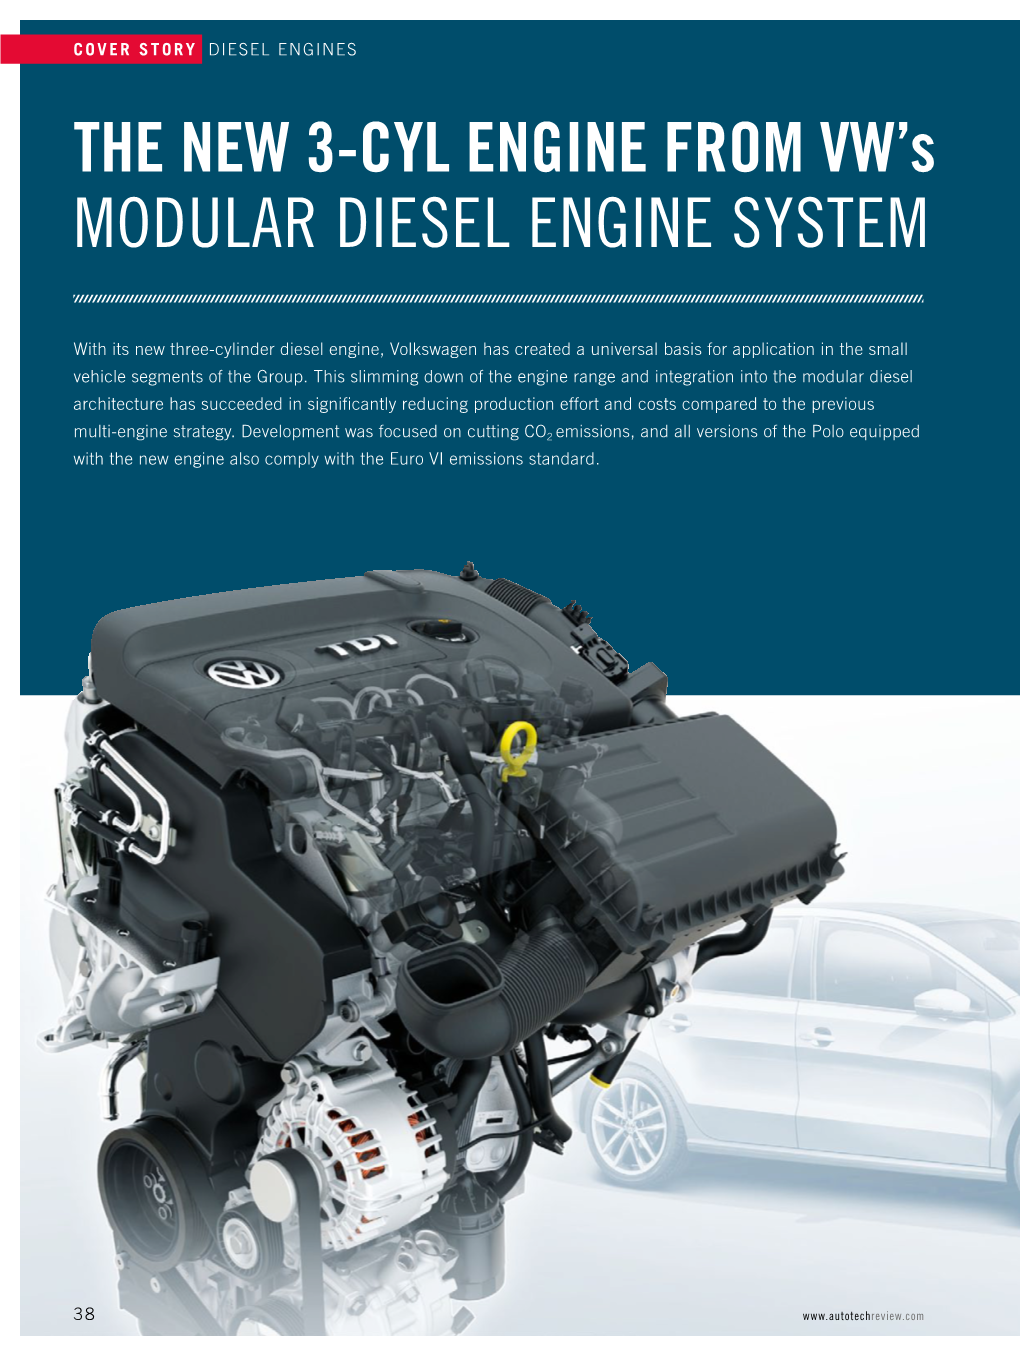 THE NEW 3-CYL ENGINE from VW's MODULAR DIESEL ENGINE